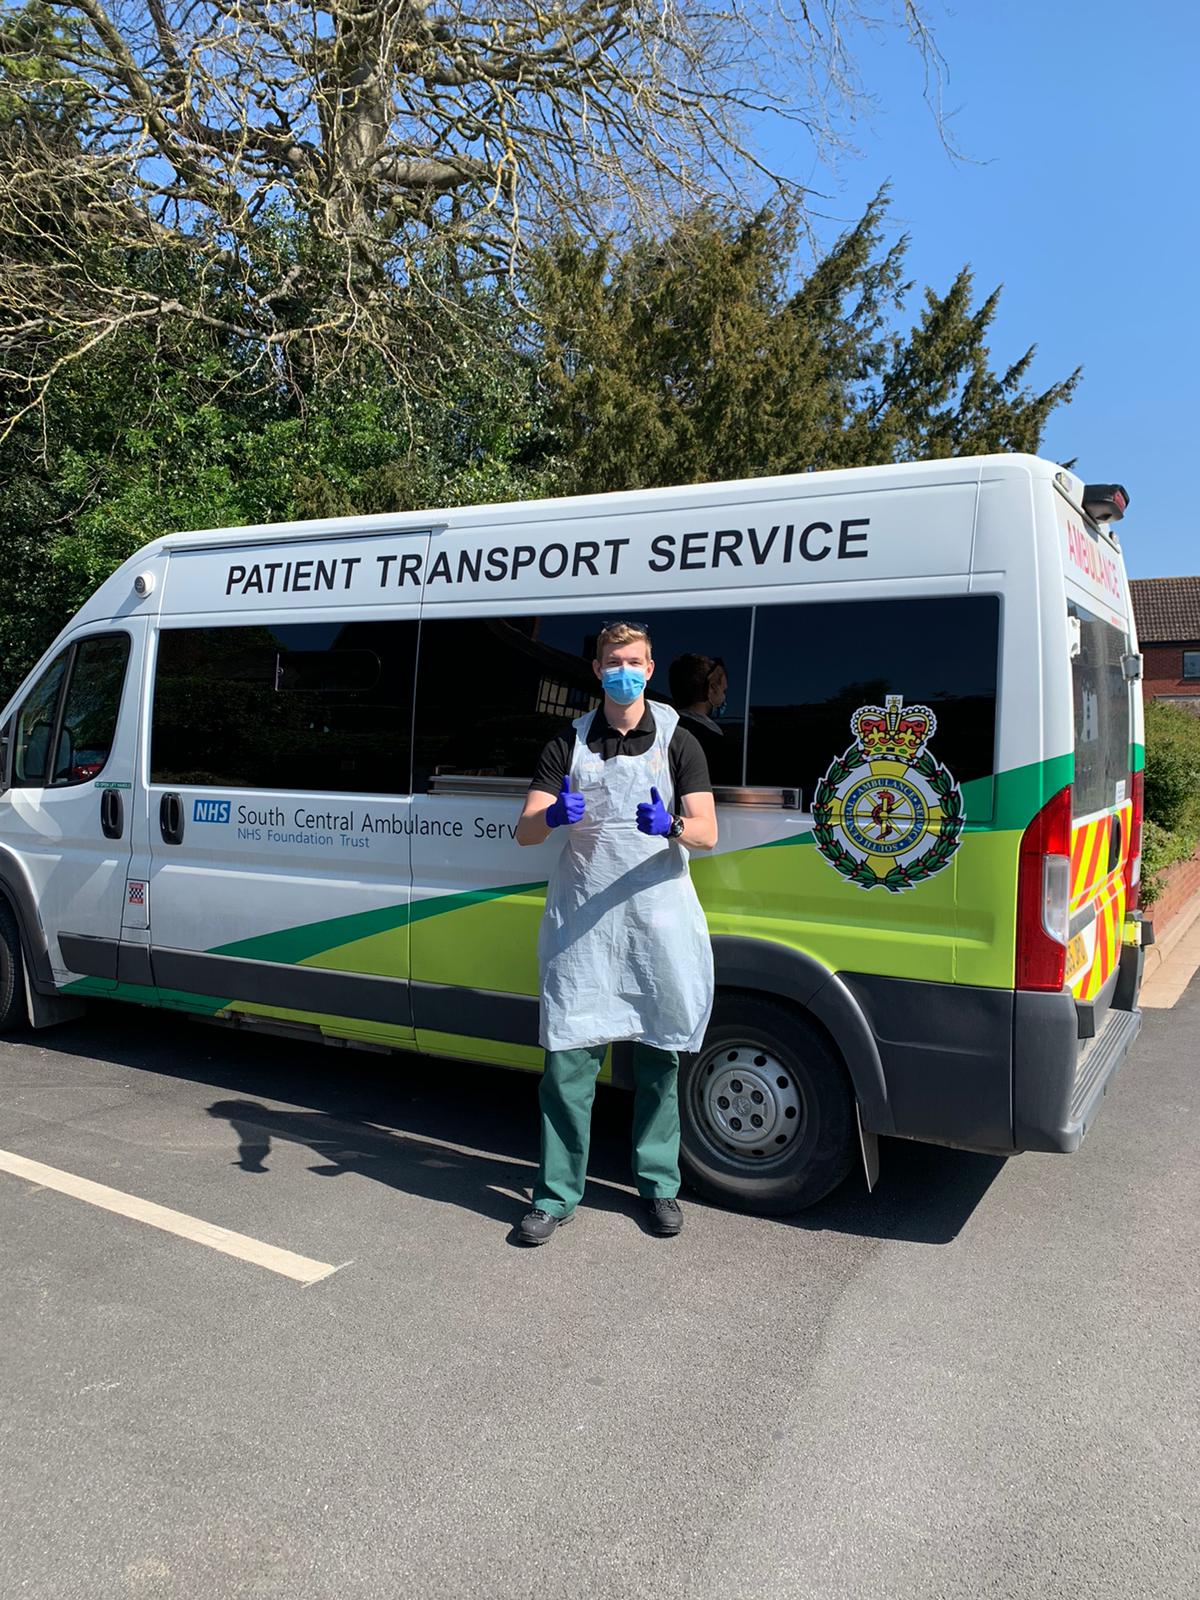 Sergeant Sam Smith working with the Patient Transport Service